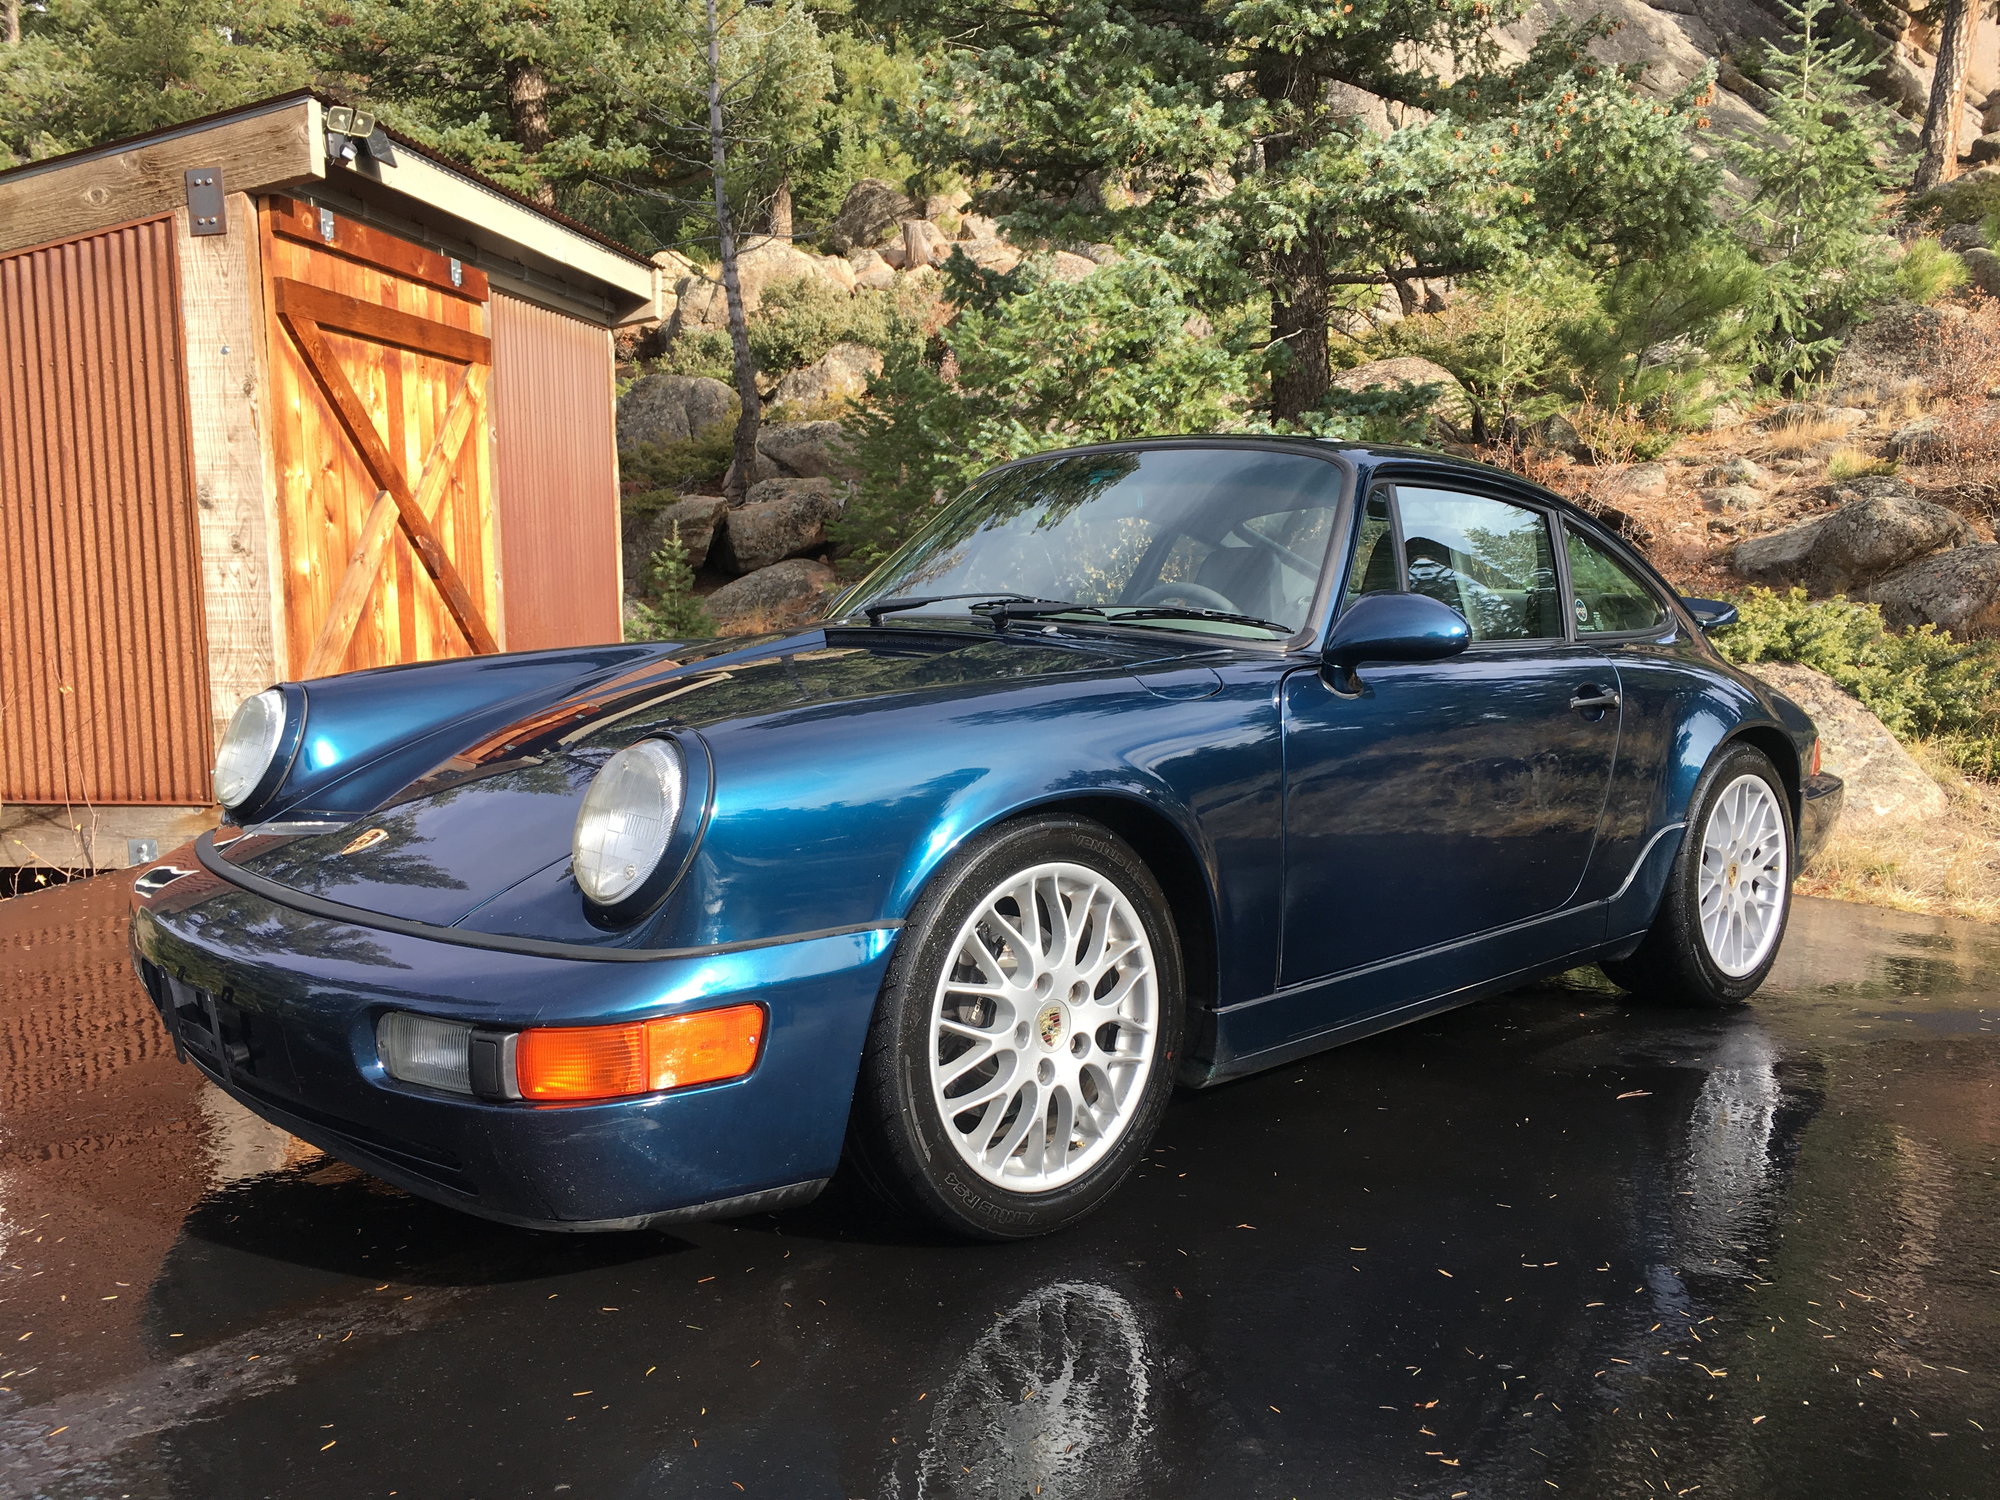 1993 Porsche 911 - 1993 Porsche Carrera 4 Coupe - Gorgeous Amazon Green and Well Maintained - Used - VIN WP0AB2963PS420142 - 124,500 Miles - 6 cyl - AWD - Manual - Coupe - Other - Evergreen, CO 80439, United States